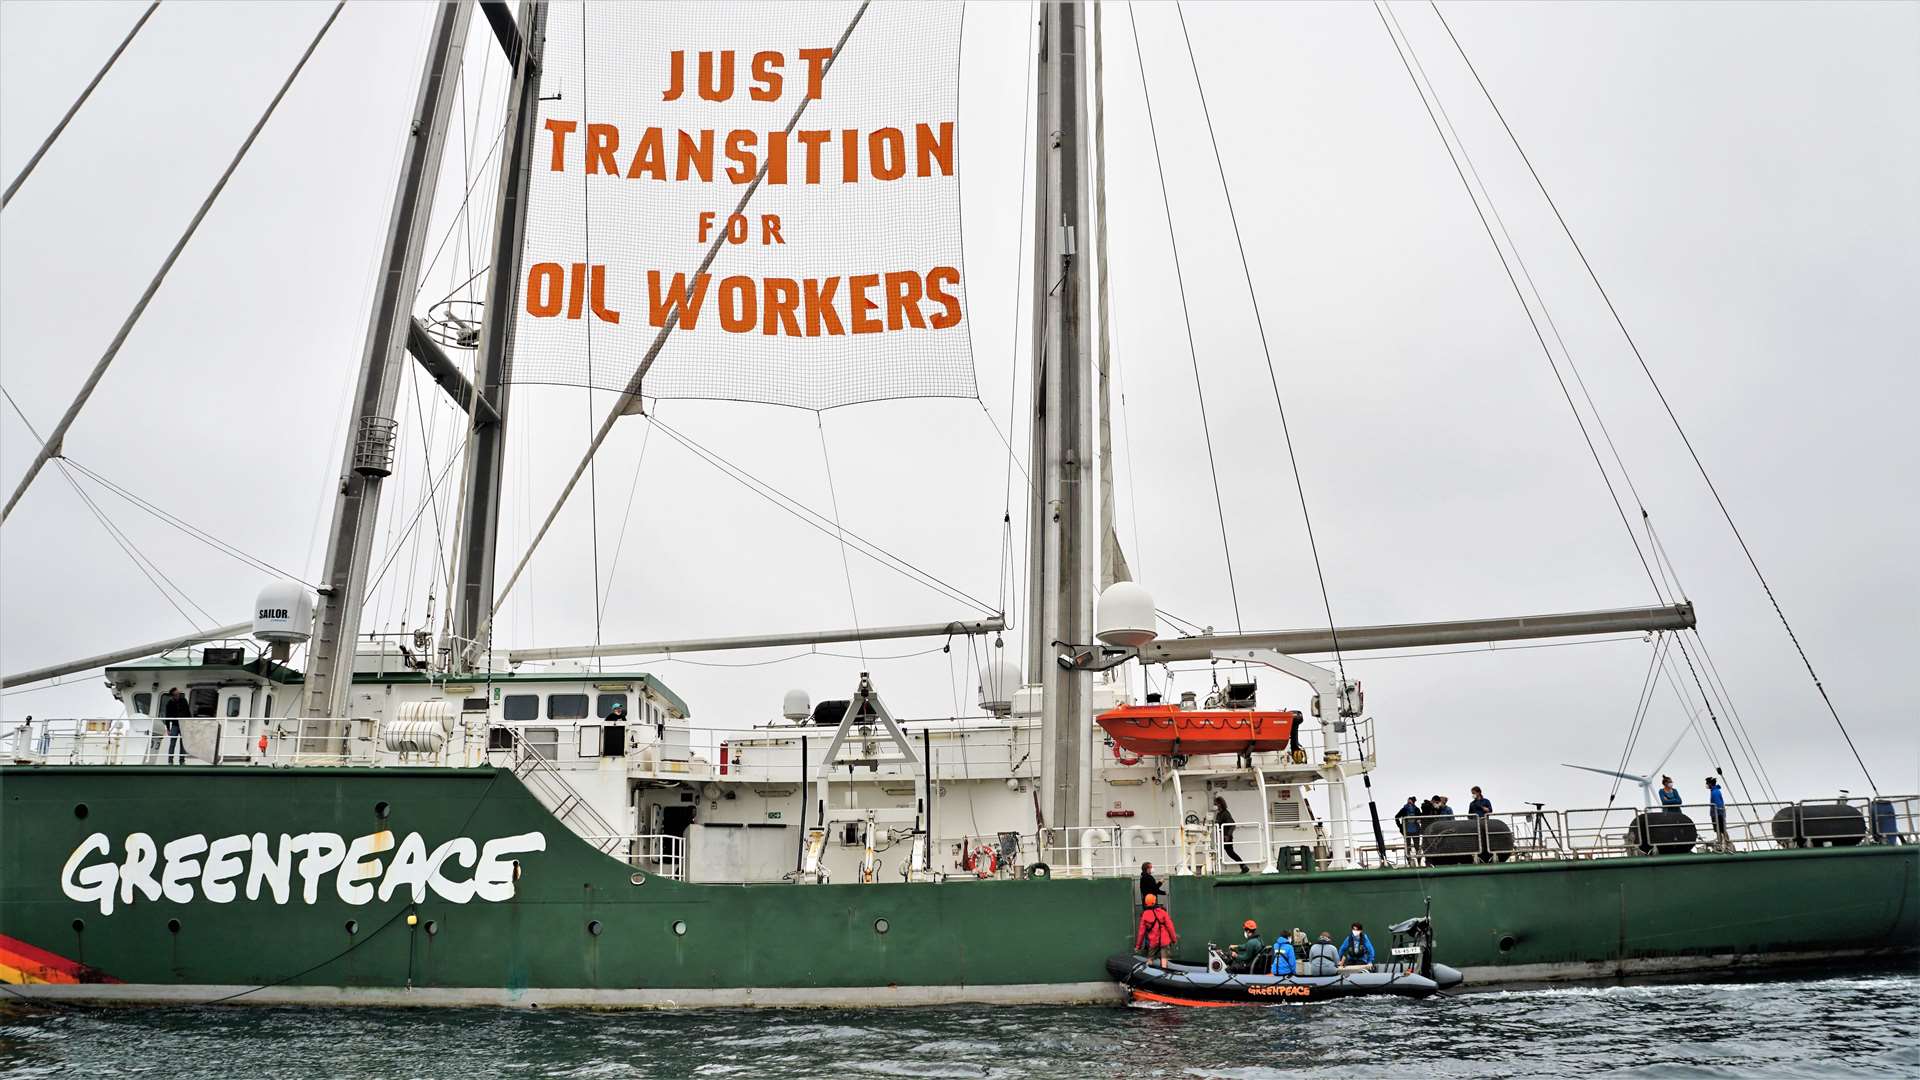 The message was loud and clear – Just Transition for Oil Workers.